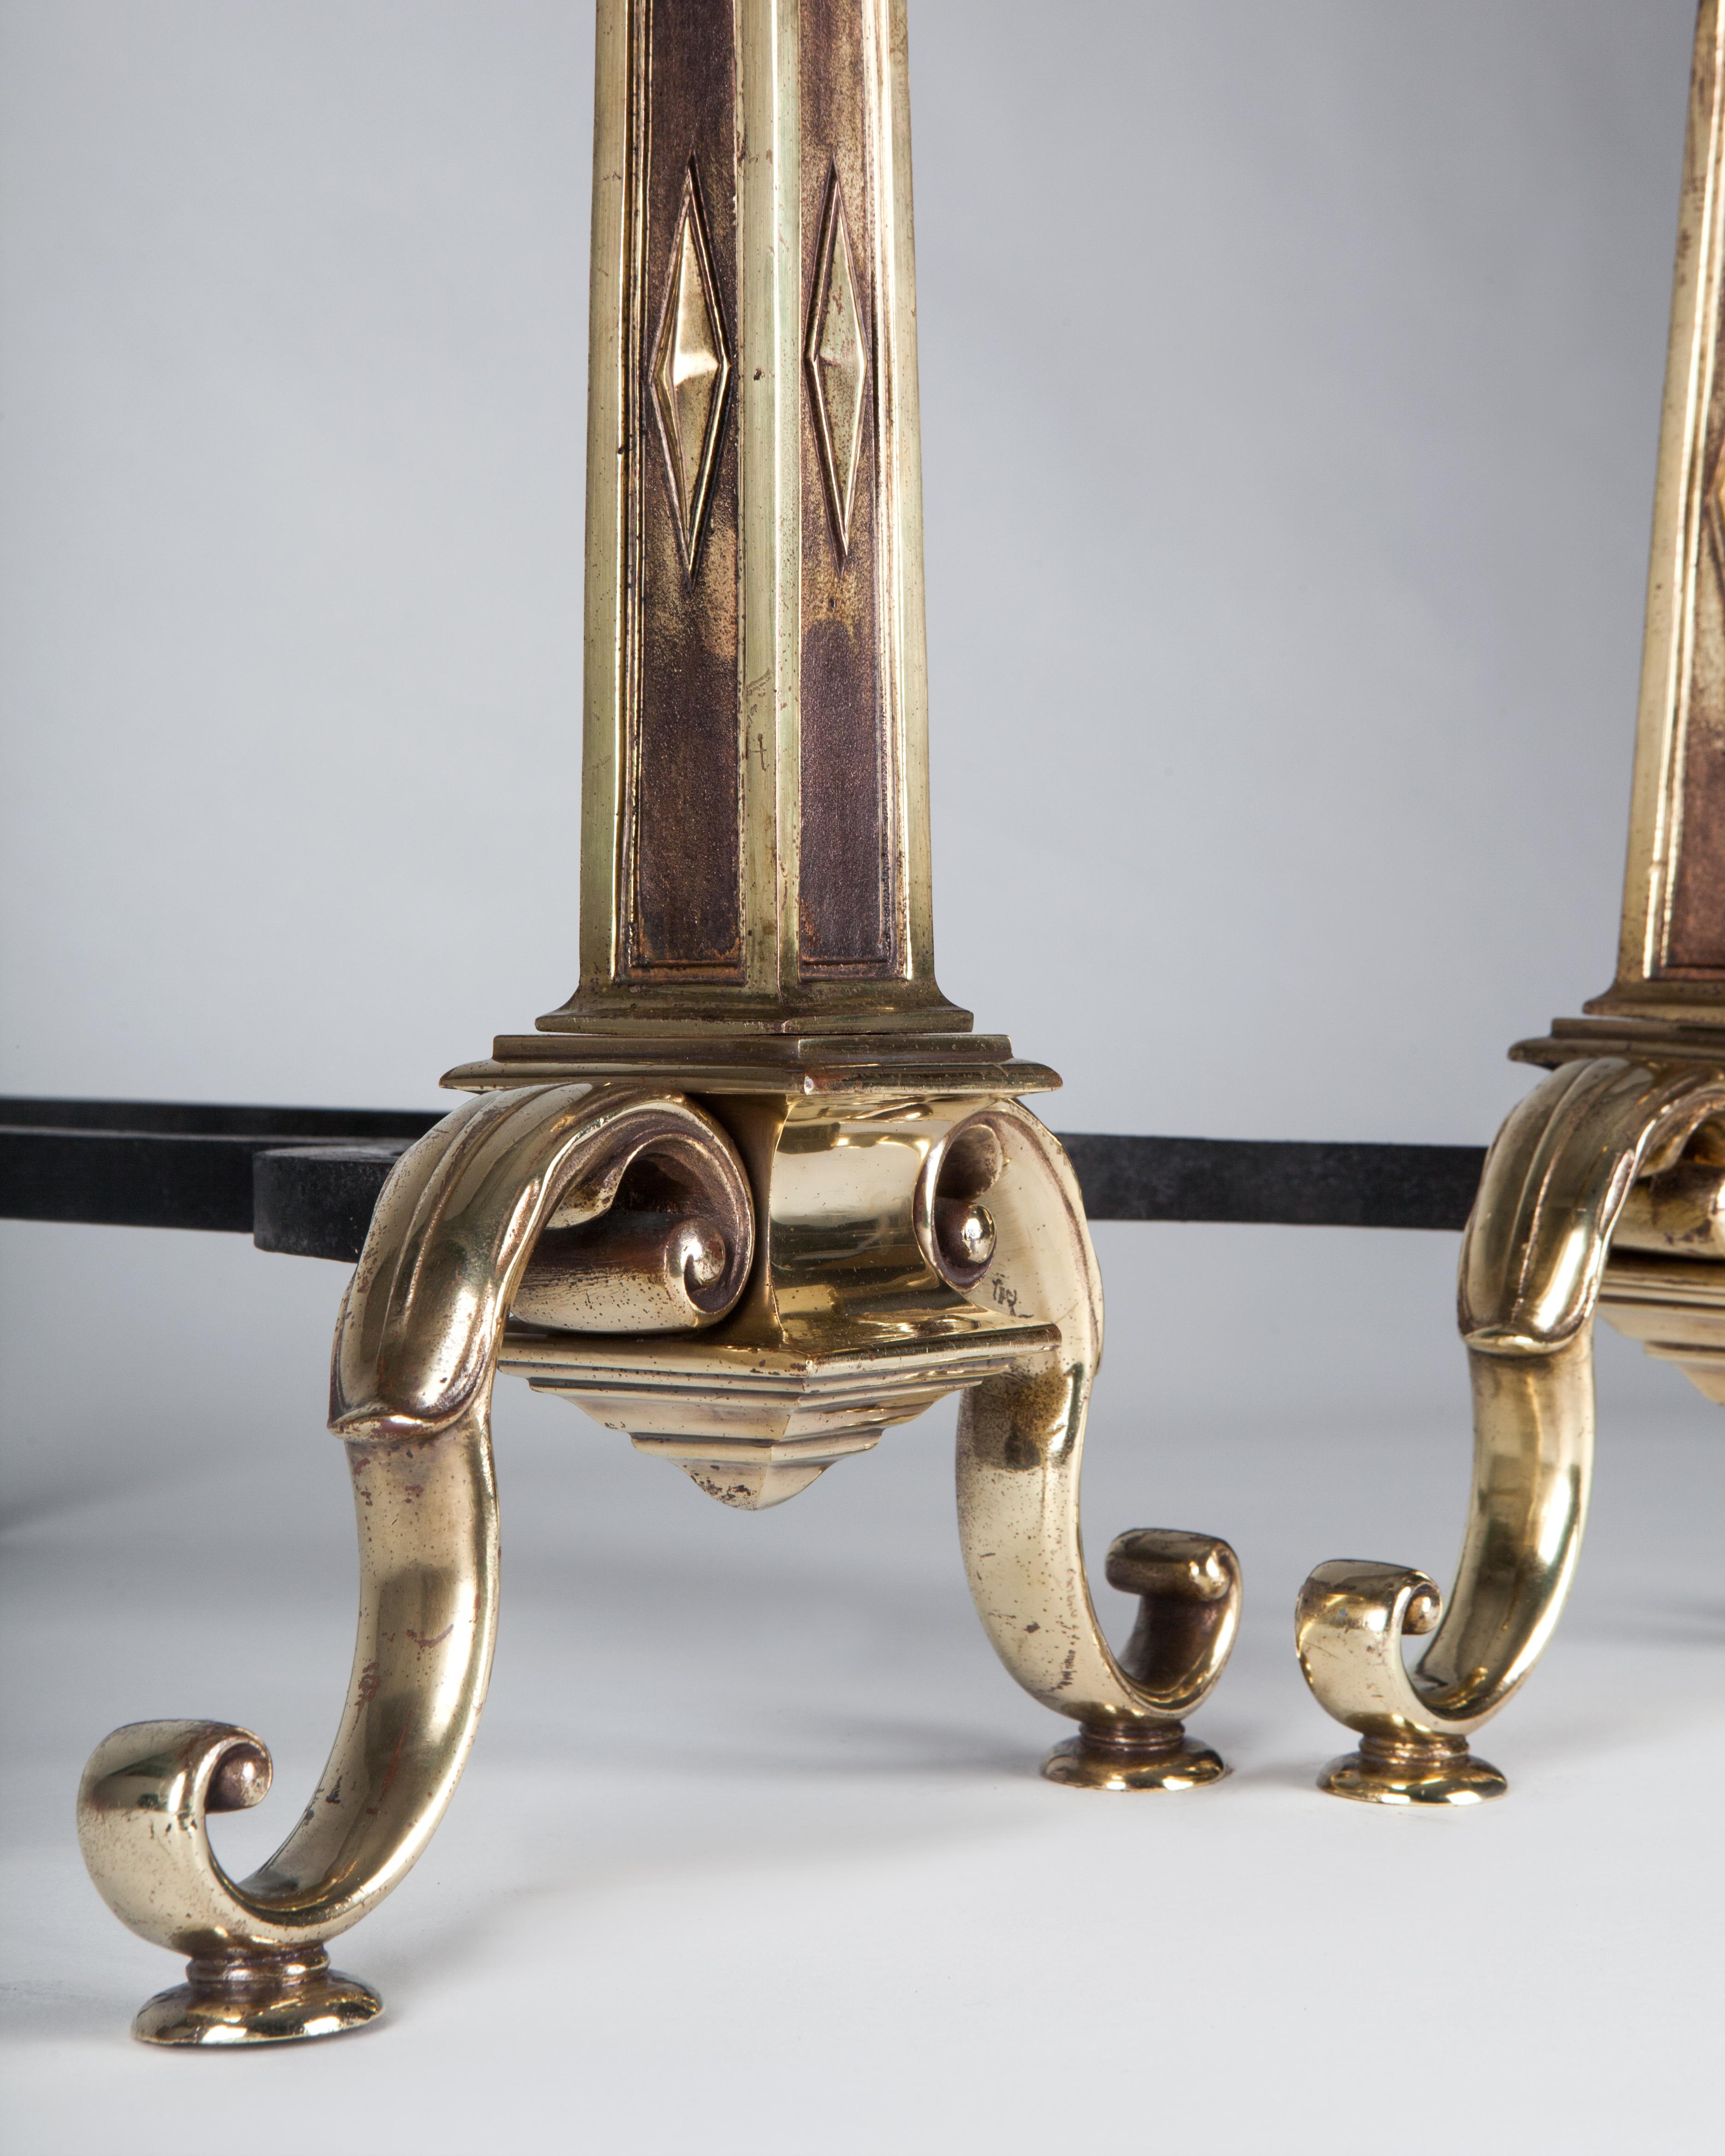 Blackened Cast Bronze Andirons with Tapered Square Columns and Ball Finials, Circa 1920s For Sale